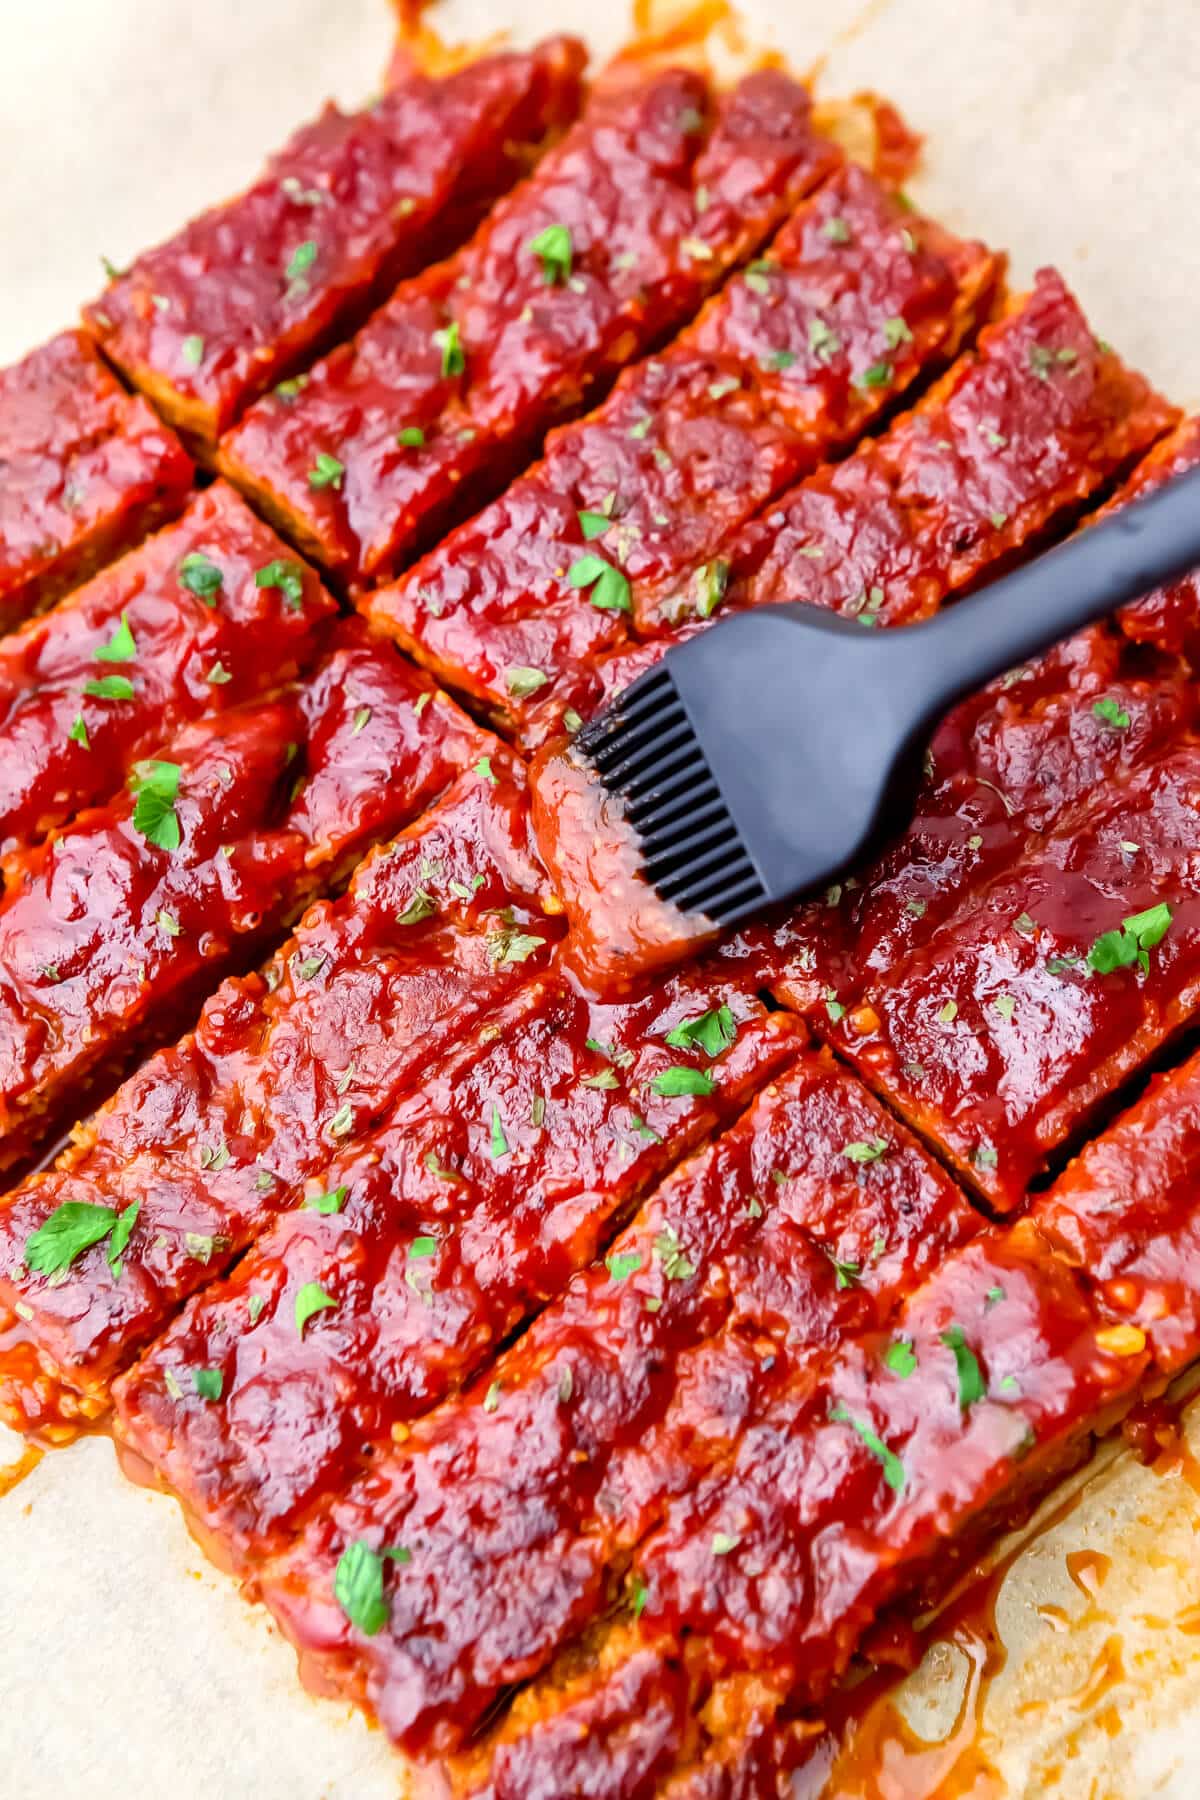 Seitan ribs being brushed with BBQ sauce.